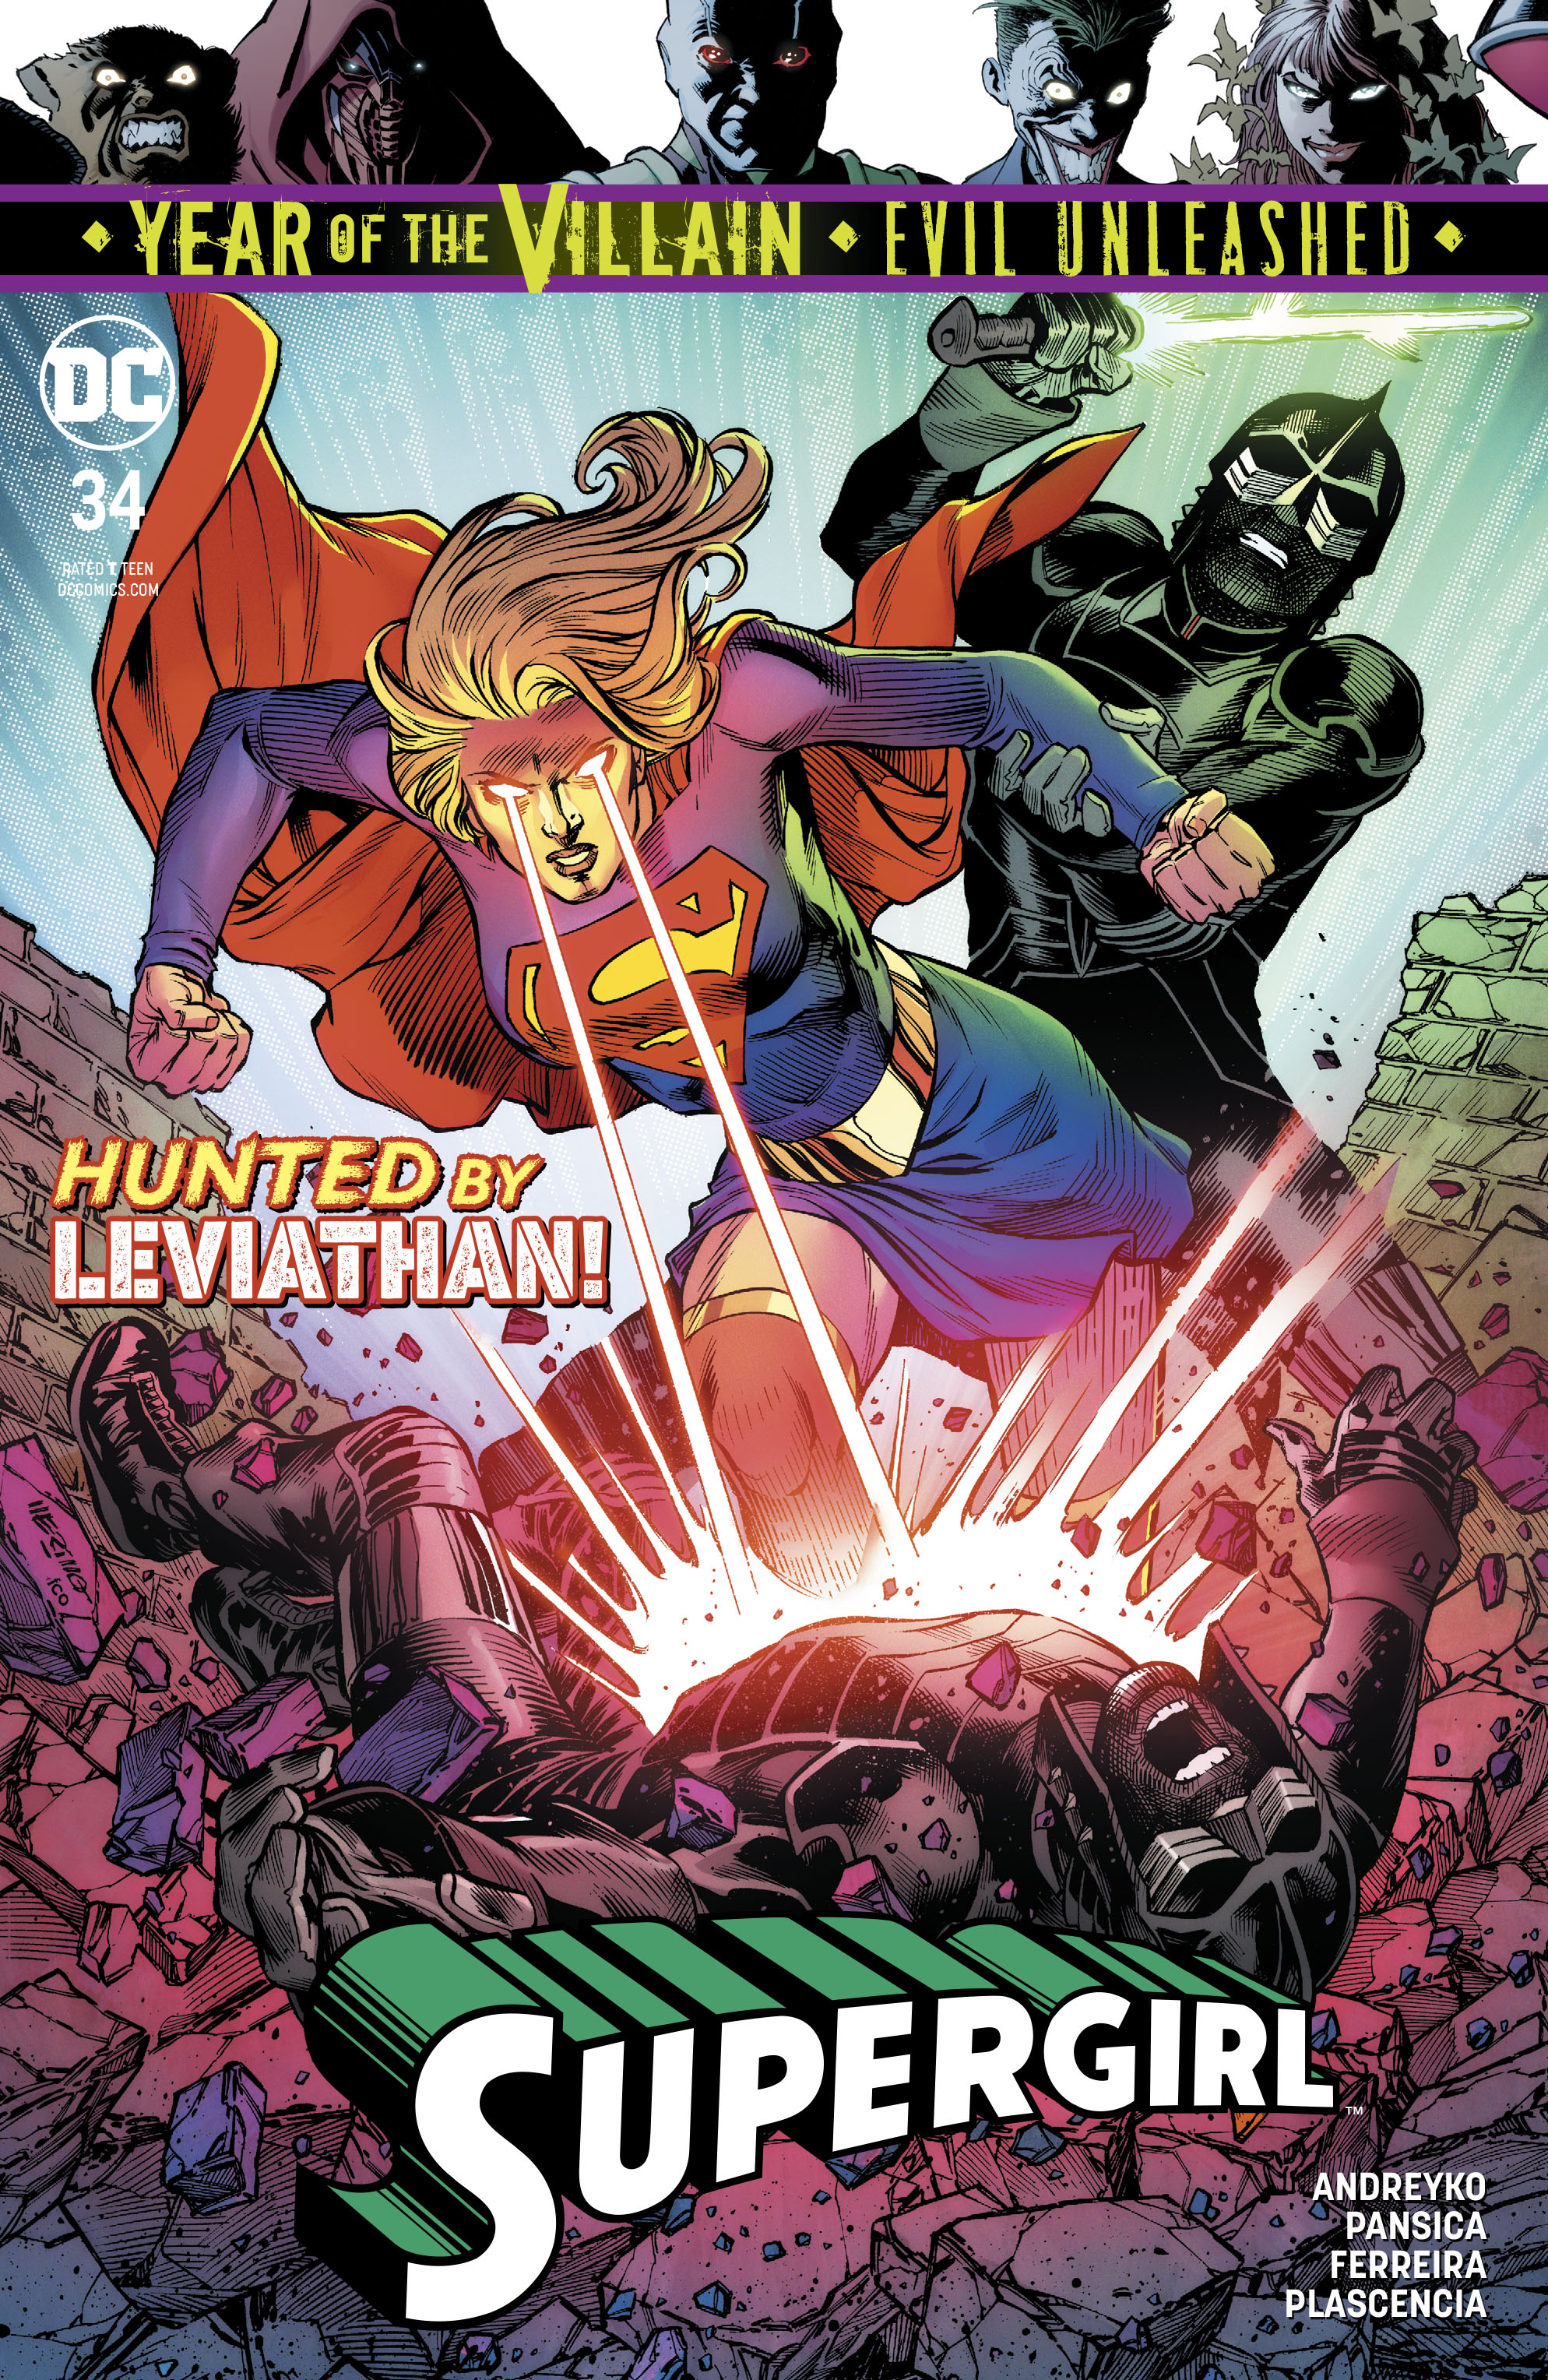 Supergirl #34 Year of the Villain Evil Unleashed (2016)